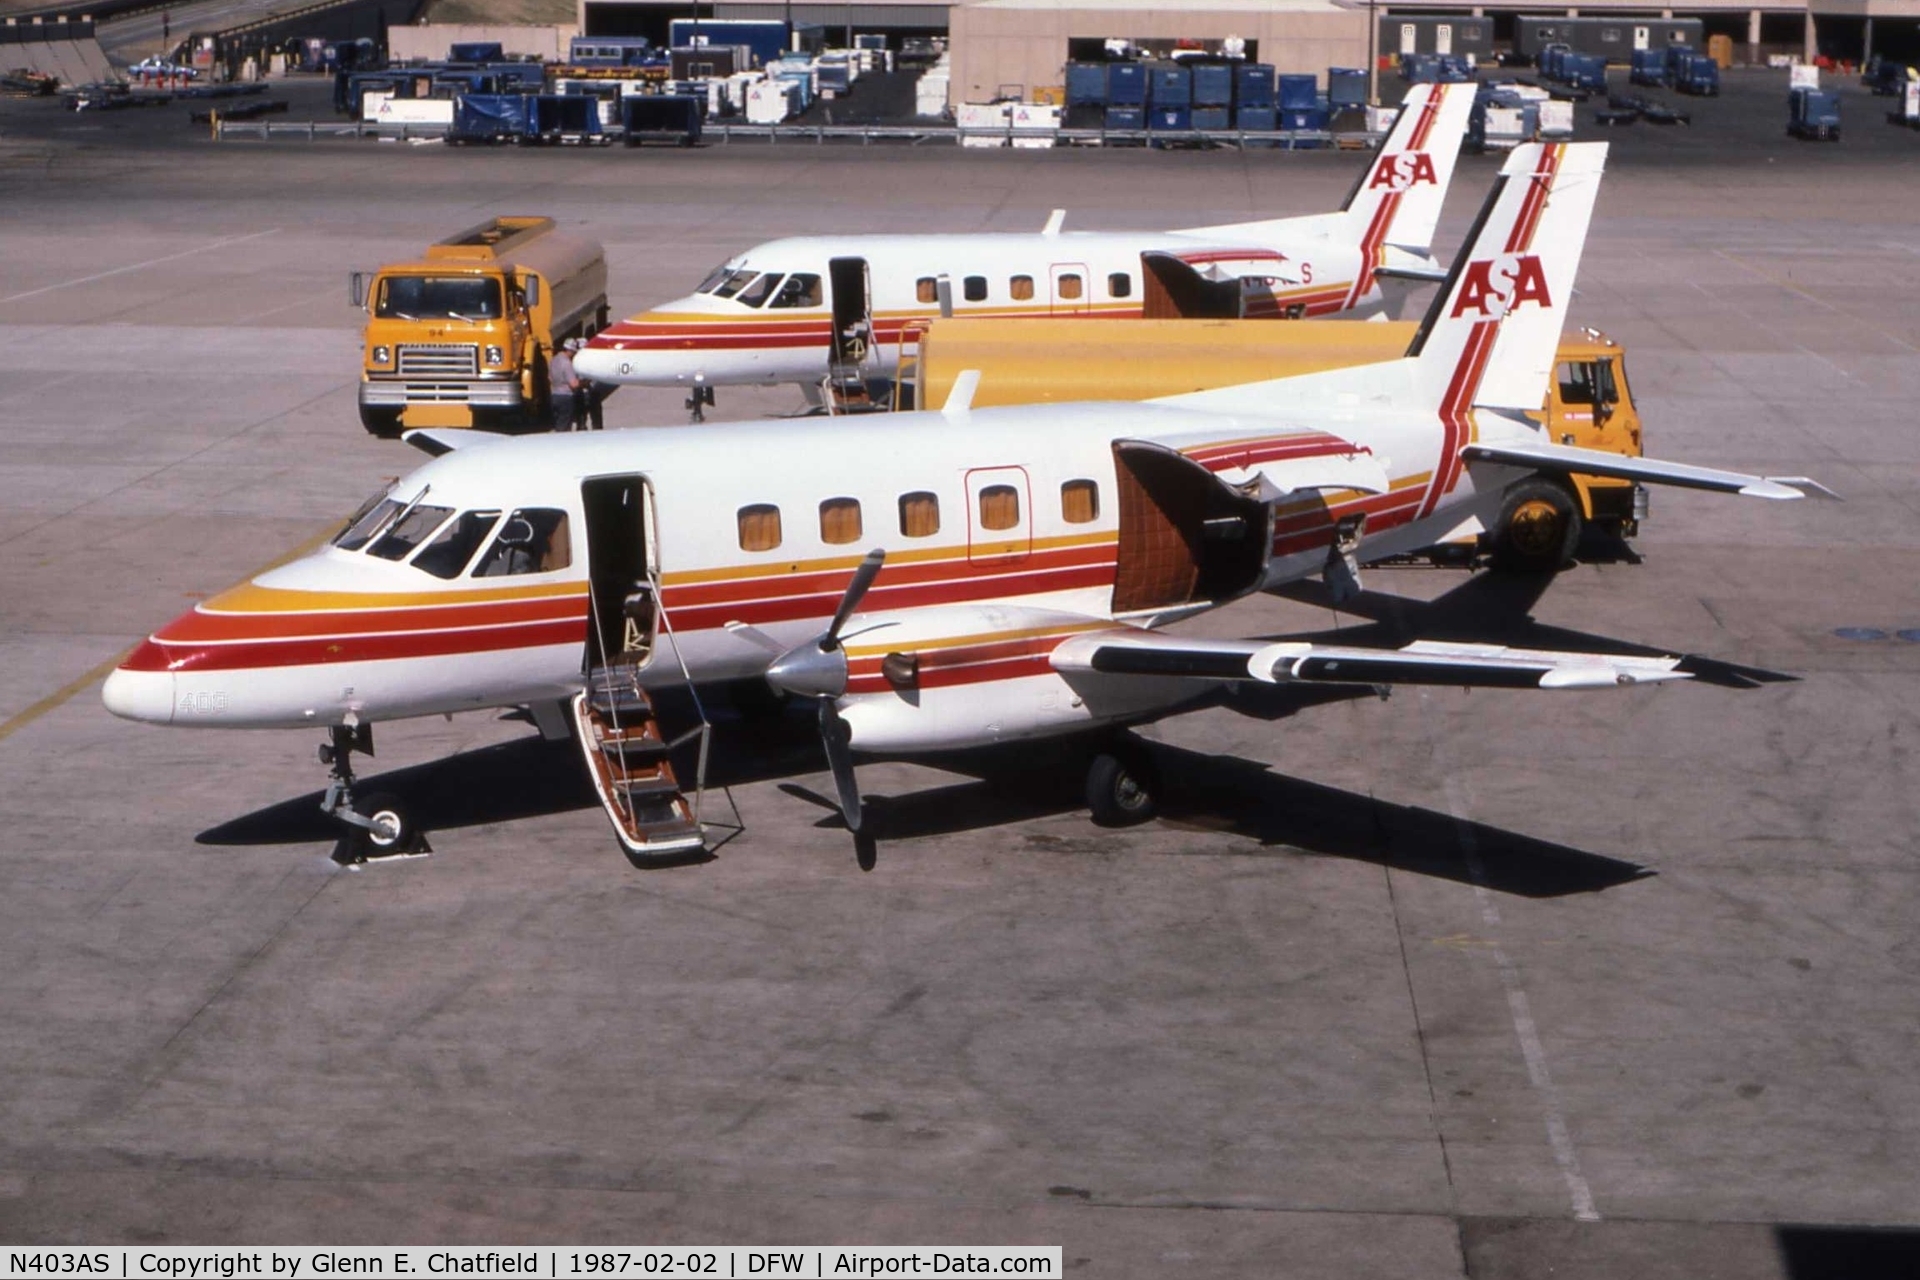 N403AS, 1981 Embraer EMB-110 Bandeirante C/N 110322, E110 that I will be taking from DFW to LAW